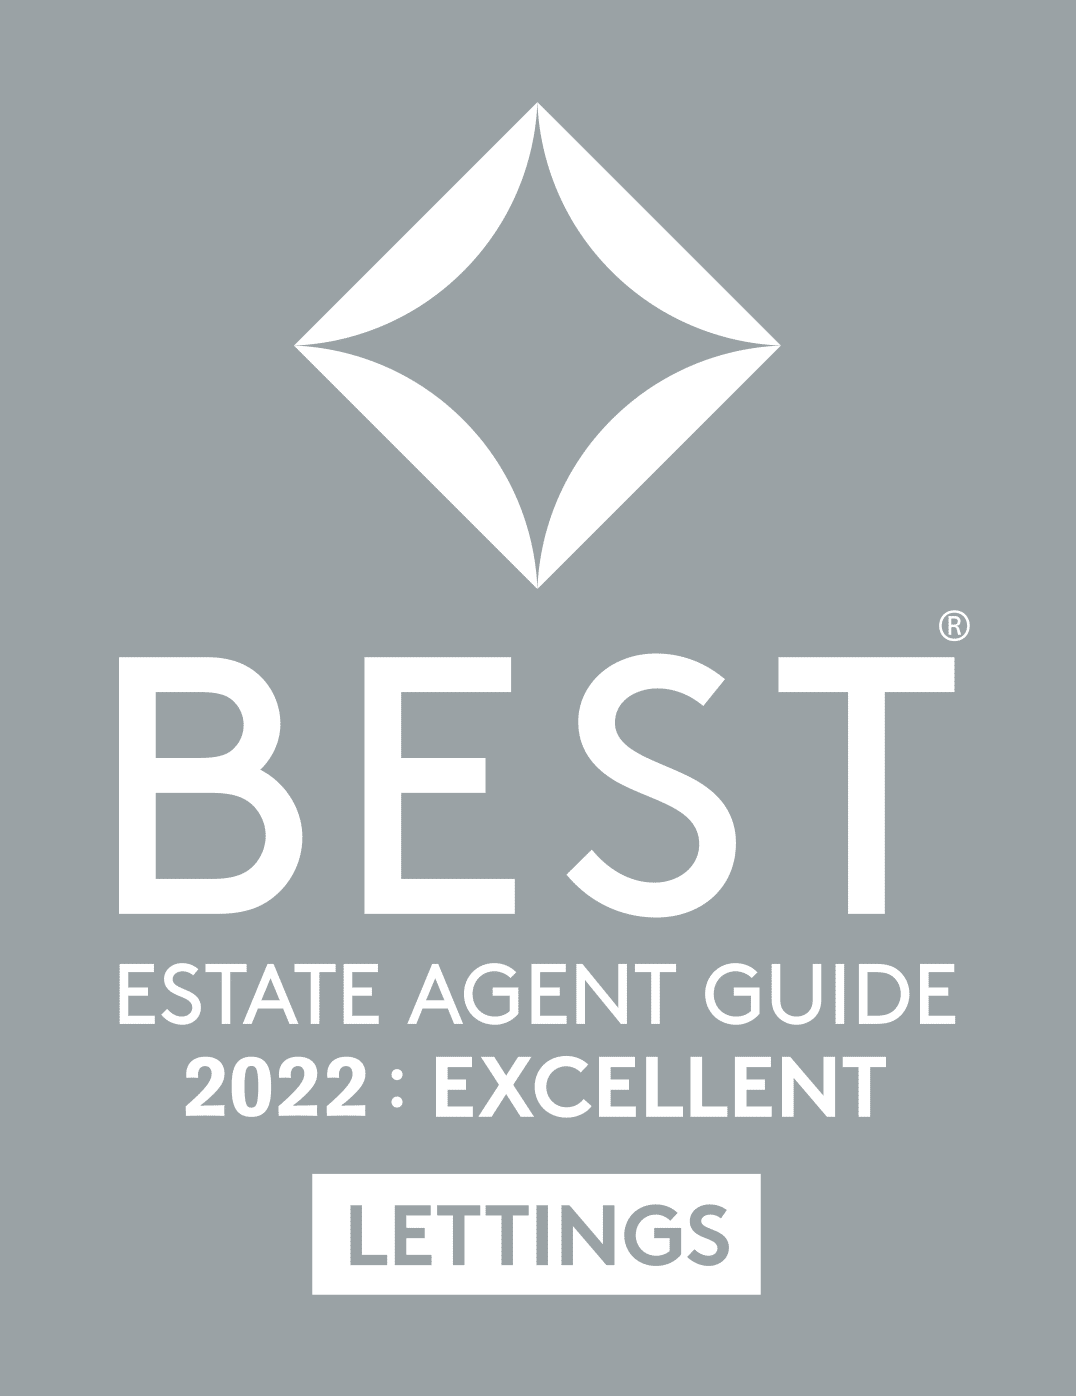 Awarded top 10% in industry, as featured in the Best Estate Agent Guide 2022